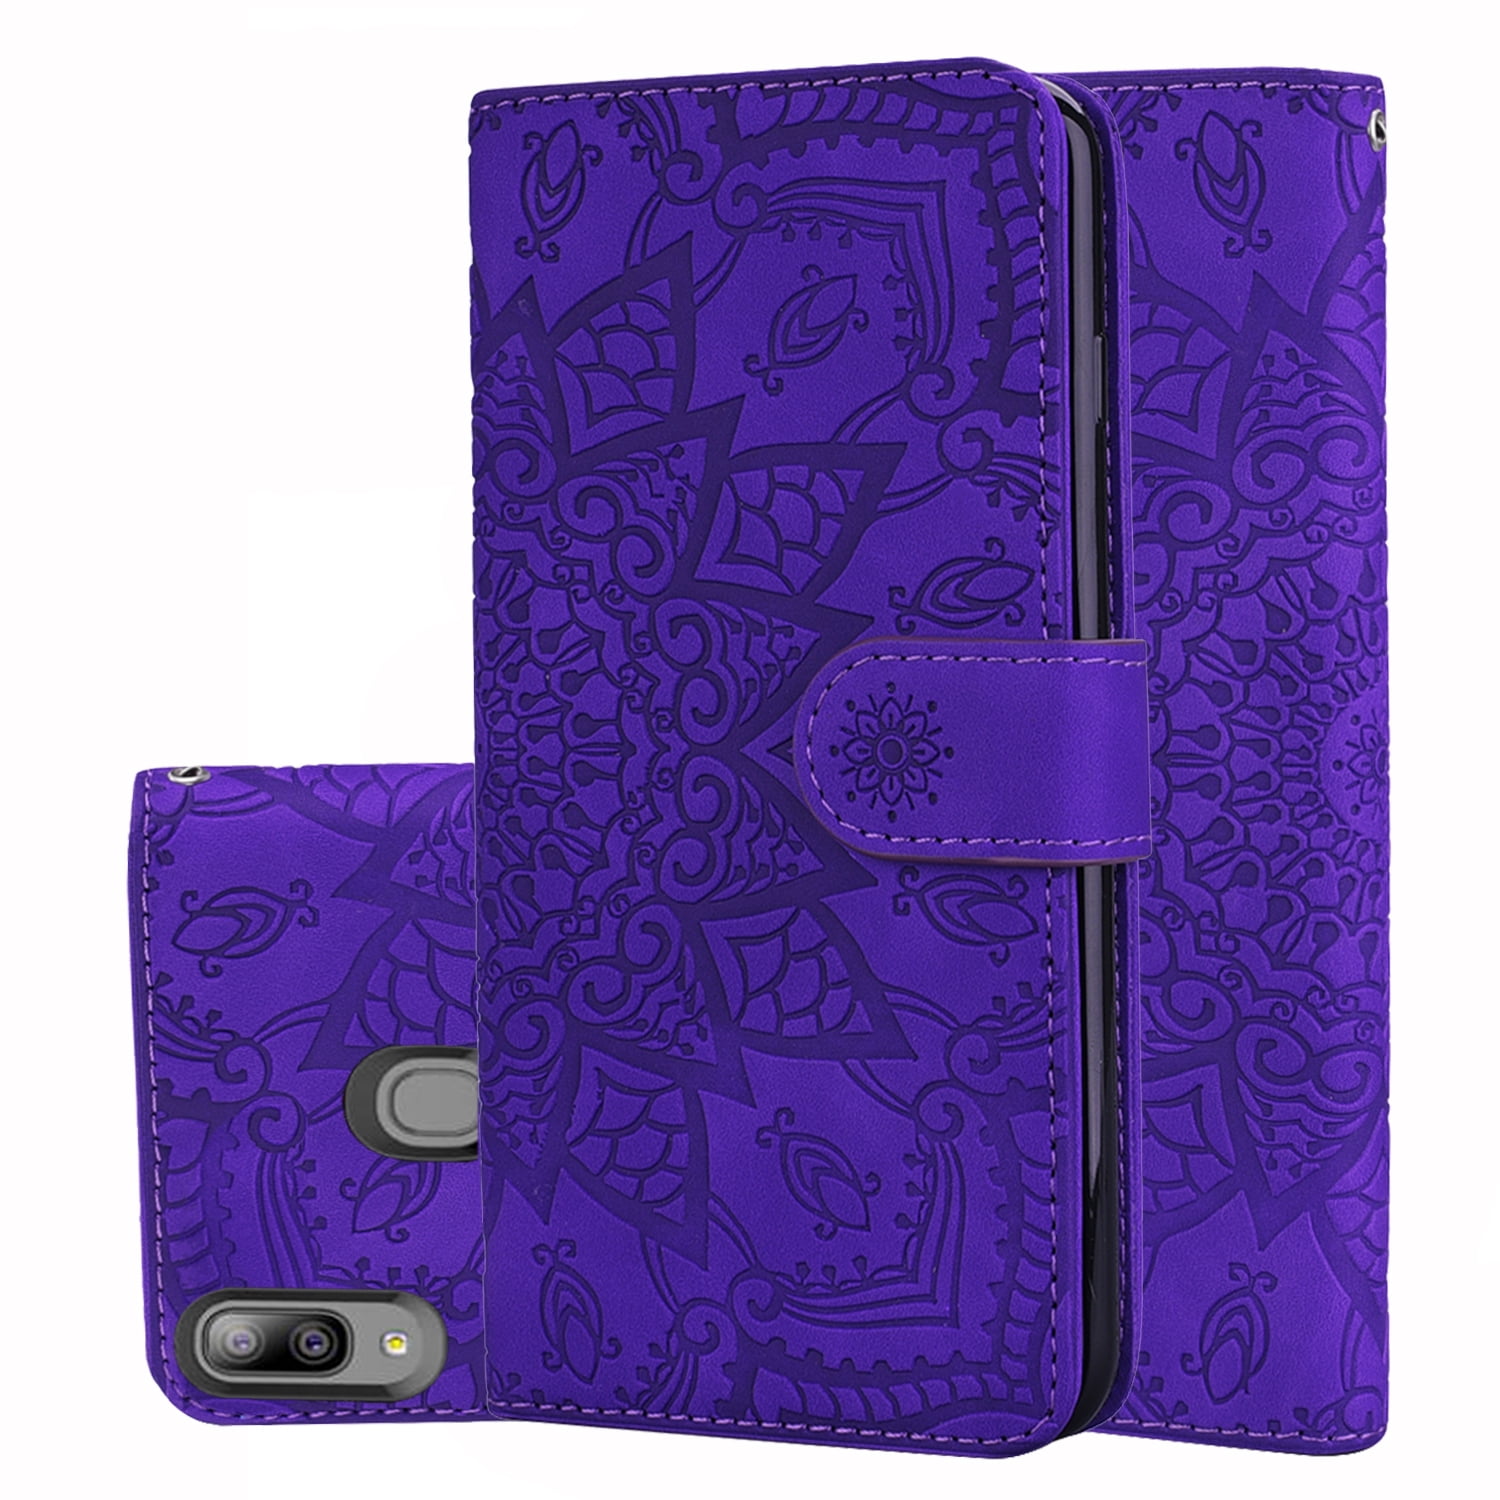 Samsung Galaxy A20e Case Shockproof PU Leather Flip Cover Notebook Wallet Case Embossed Sunflower with Magnetic Closure Stand Card Holder ID Slot Folio Soft TPU Bumper Protective Skin Purple